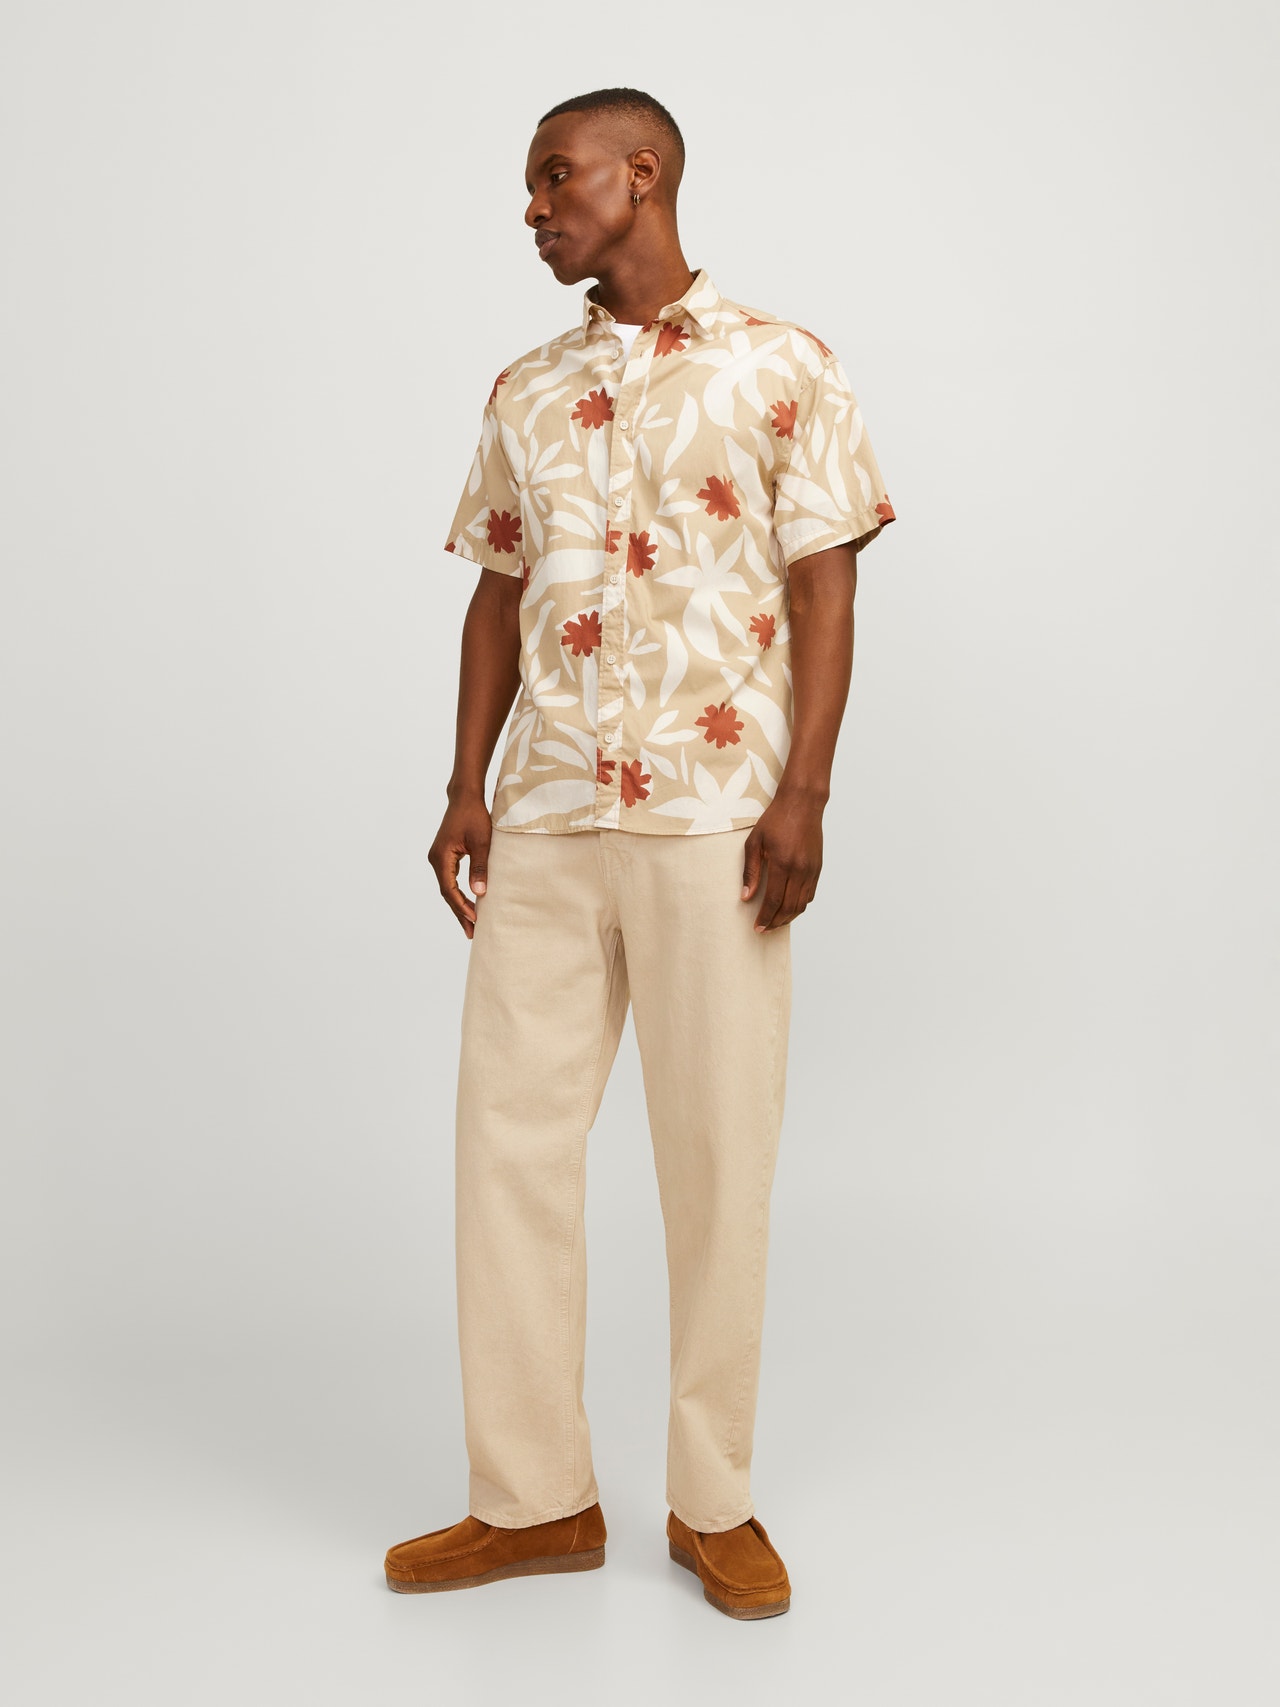 Jack & Jones Relaxed Fit Paita -Maple Syrup - 12255196